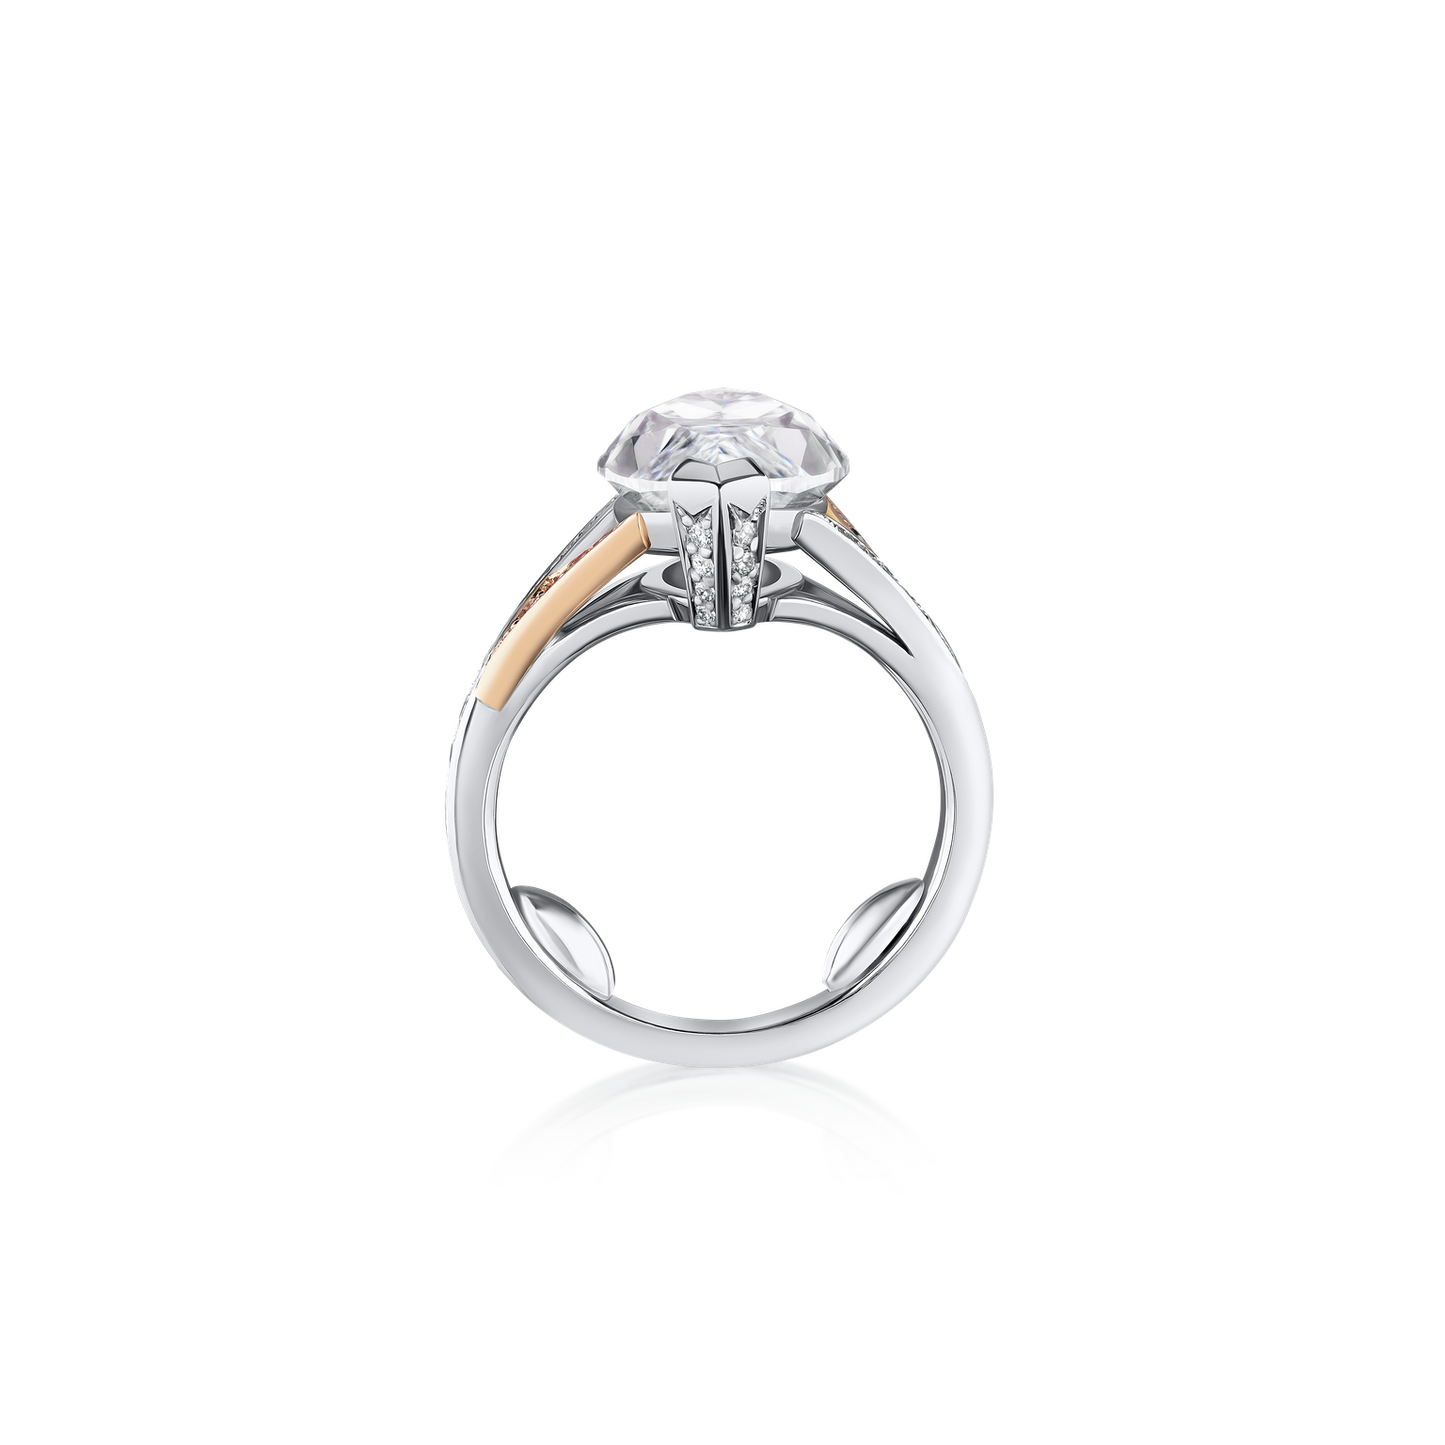 5.70cts Marquise-Cut Diamond Ring with Split Shoulders